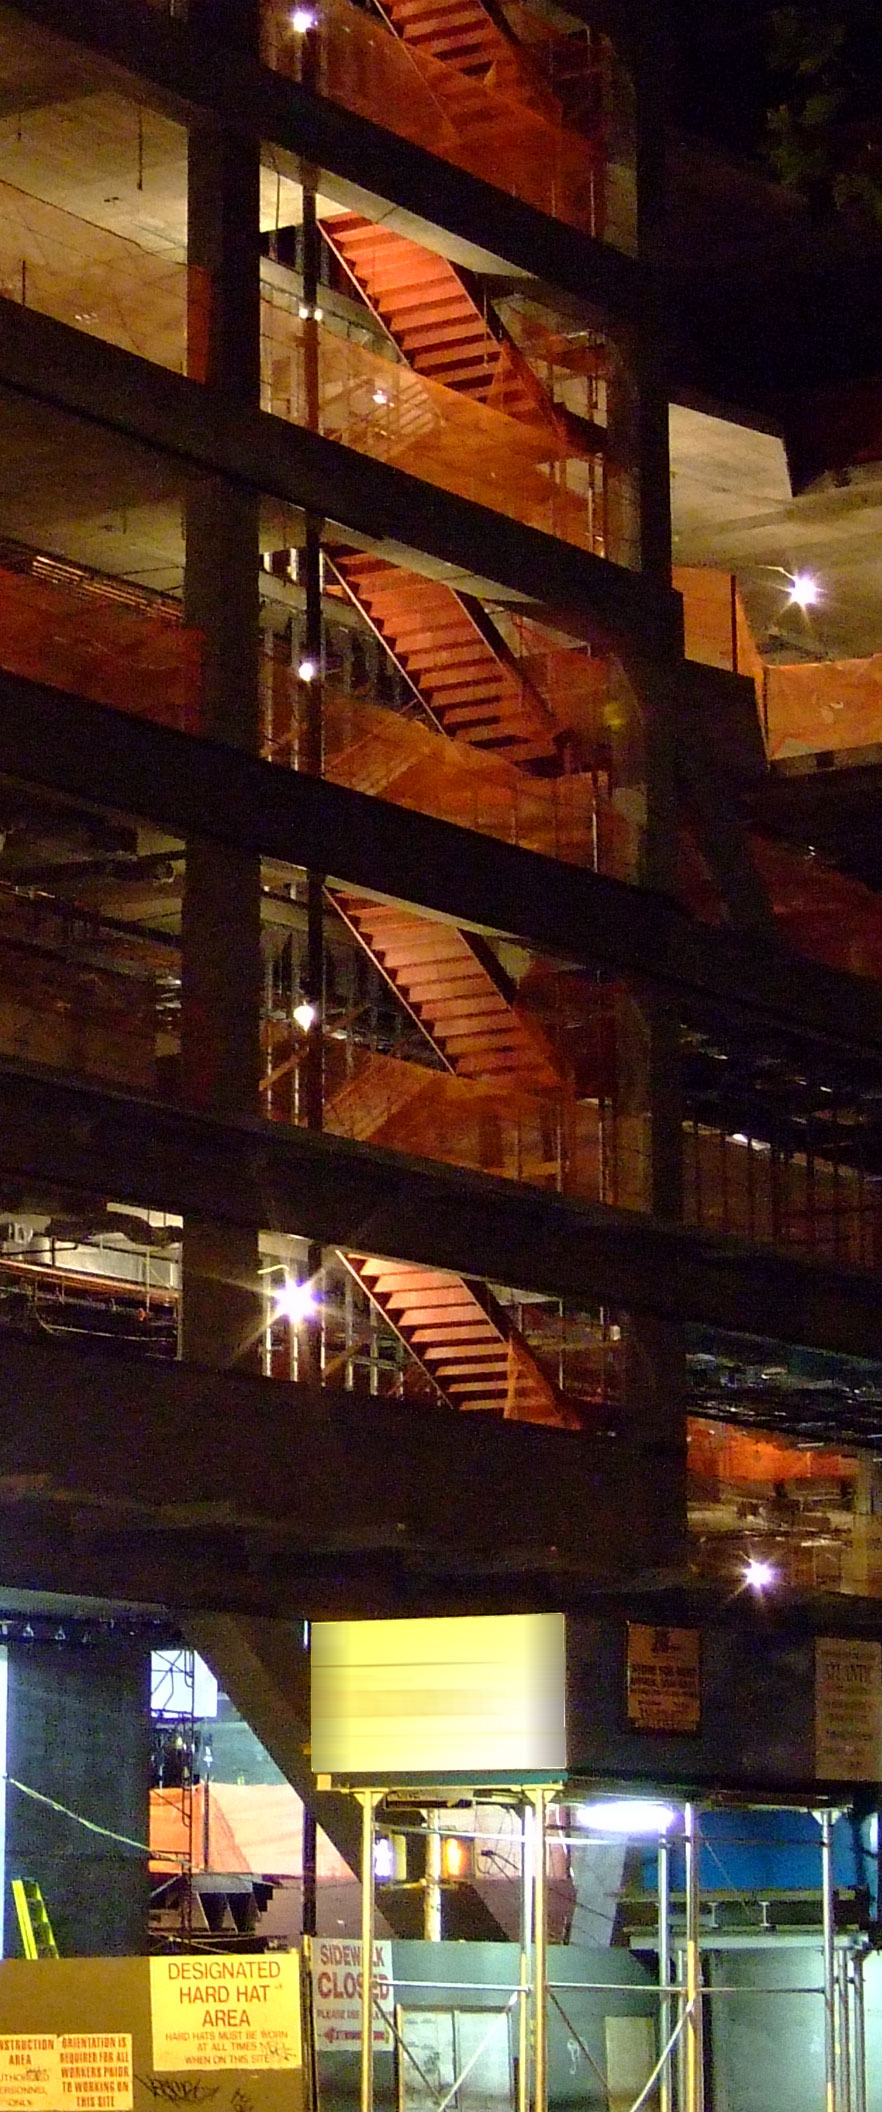 [scene 9 anatomy]<br />
			steel skeleton of an abandoned building<br />
			illuminated from within,is so neatly framed<br />
			in <span class="enlarge">orthagonal</span> perspective